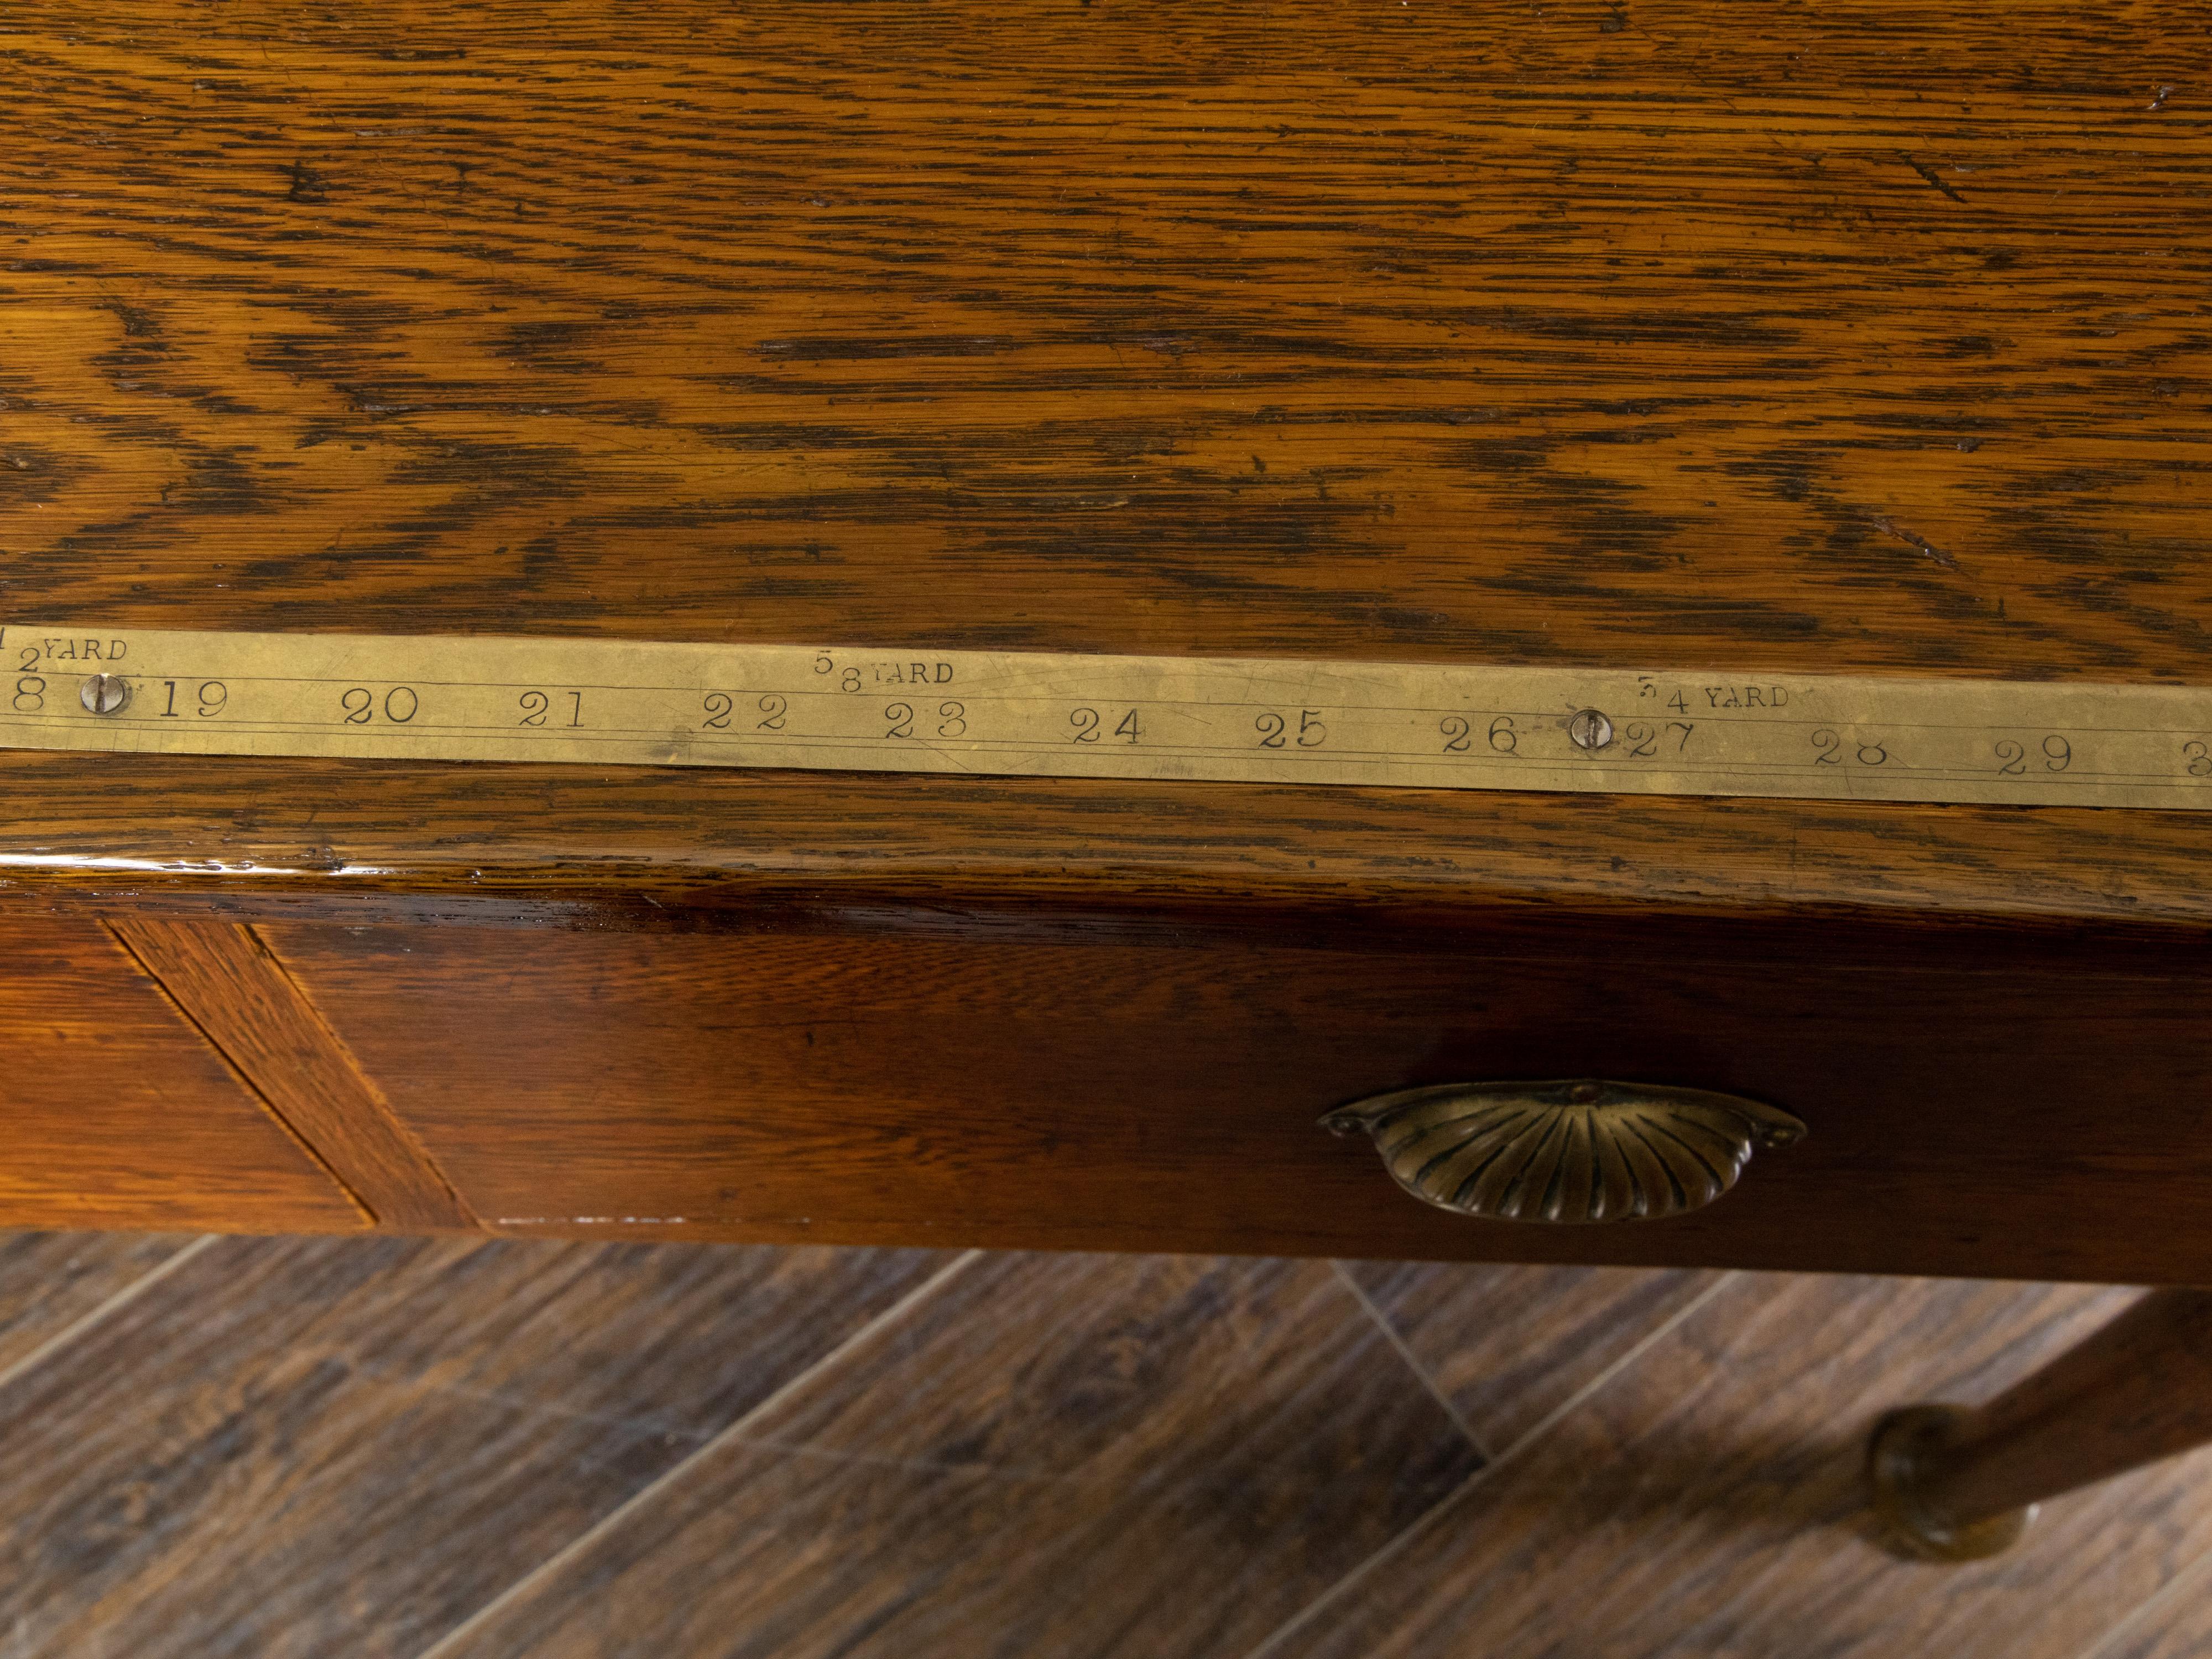 English 19th Century Oak Drop Leaves Draper's Table with Brass Measuring Tape For Sale 7